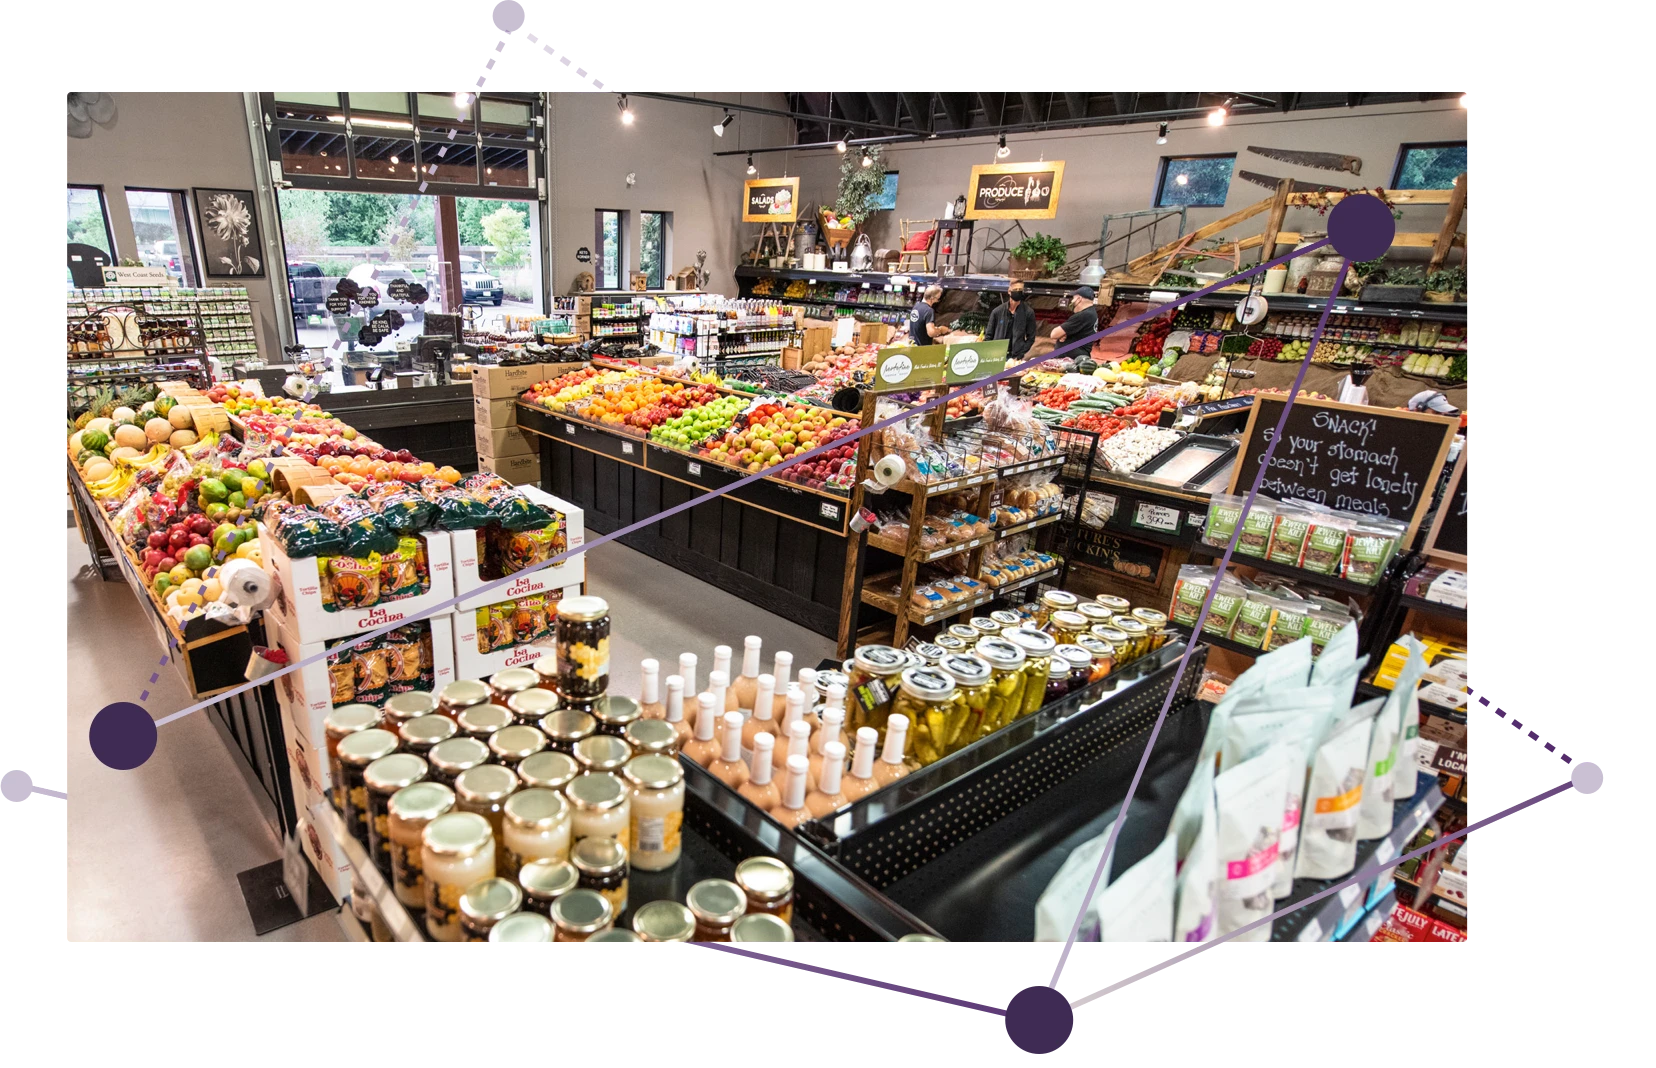 An image of a grocery store with a lot of fruit and vegetables.